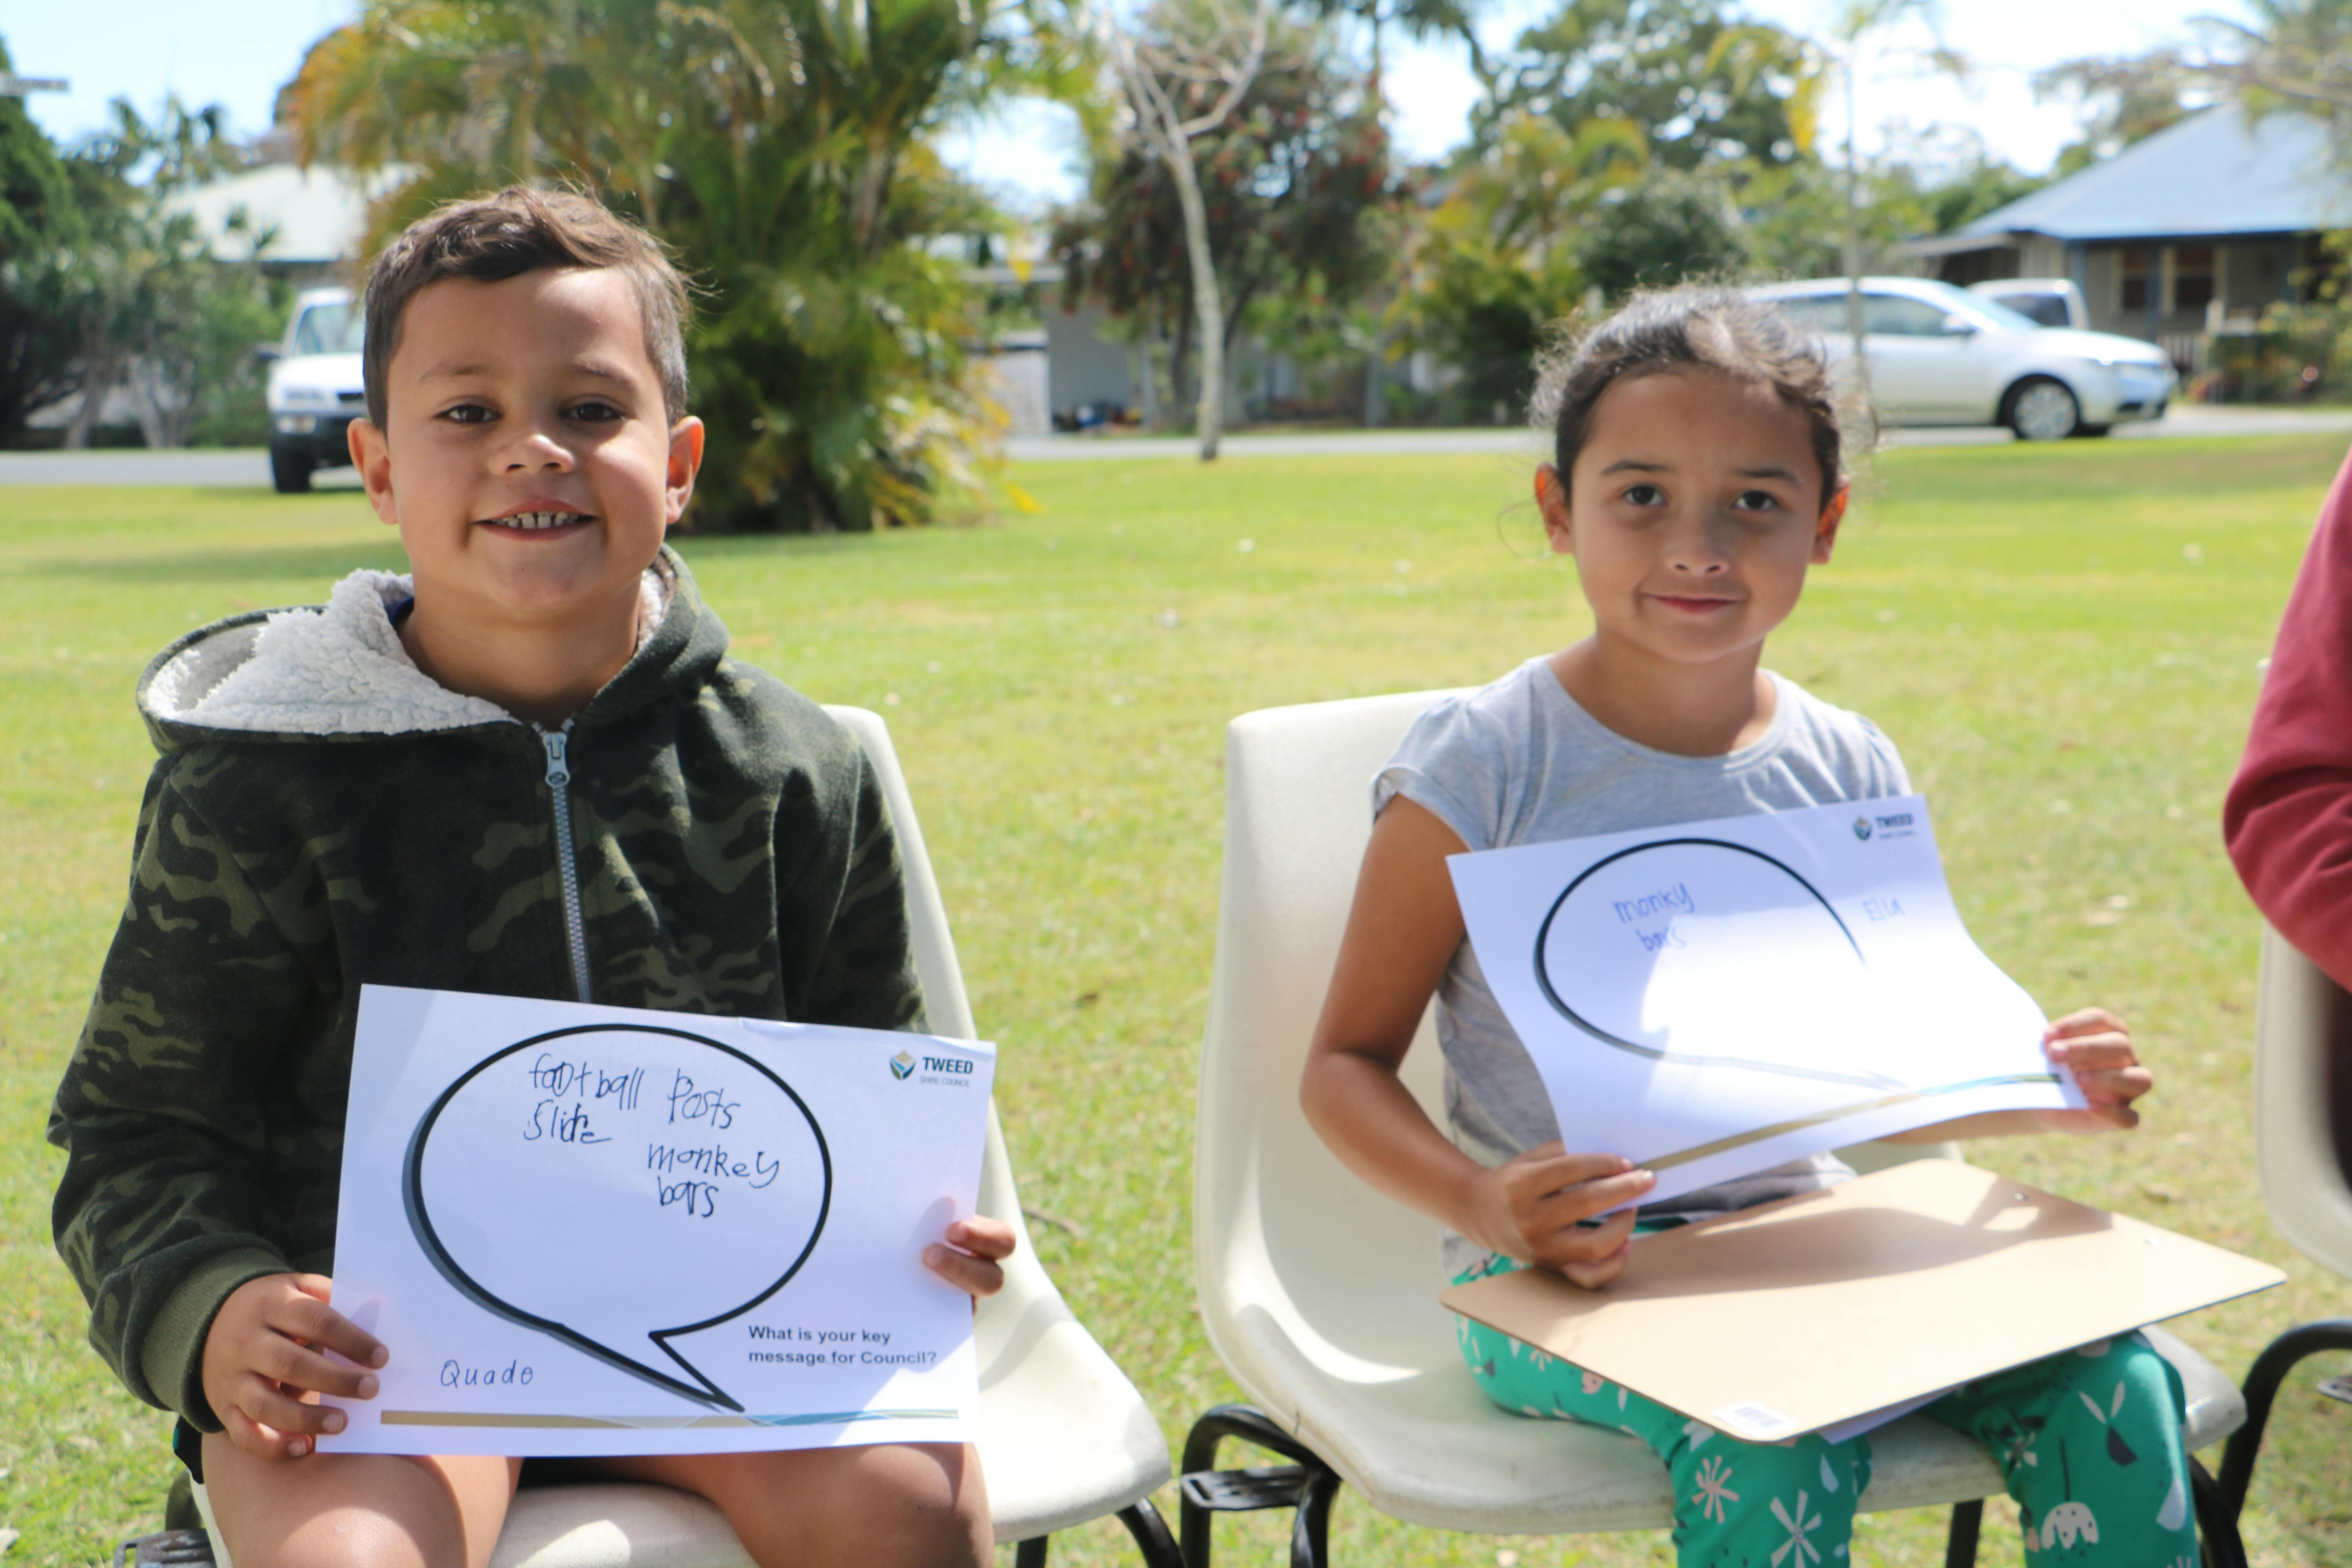 Local children sharing their ideas for the park upgrade at South Tweed Heads